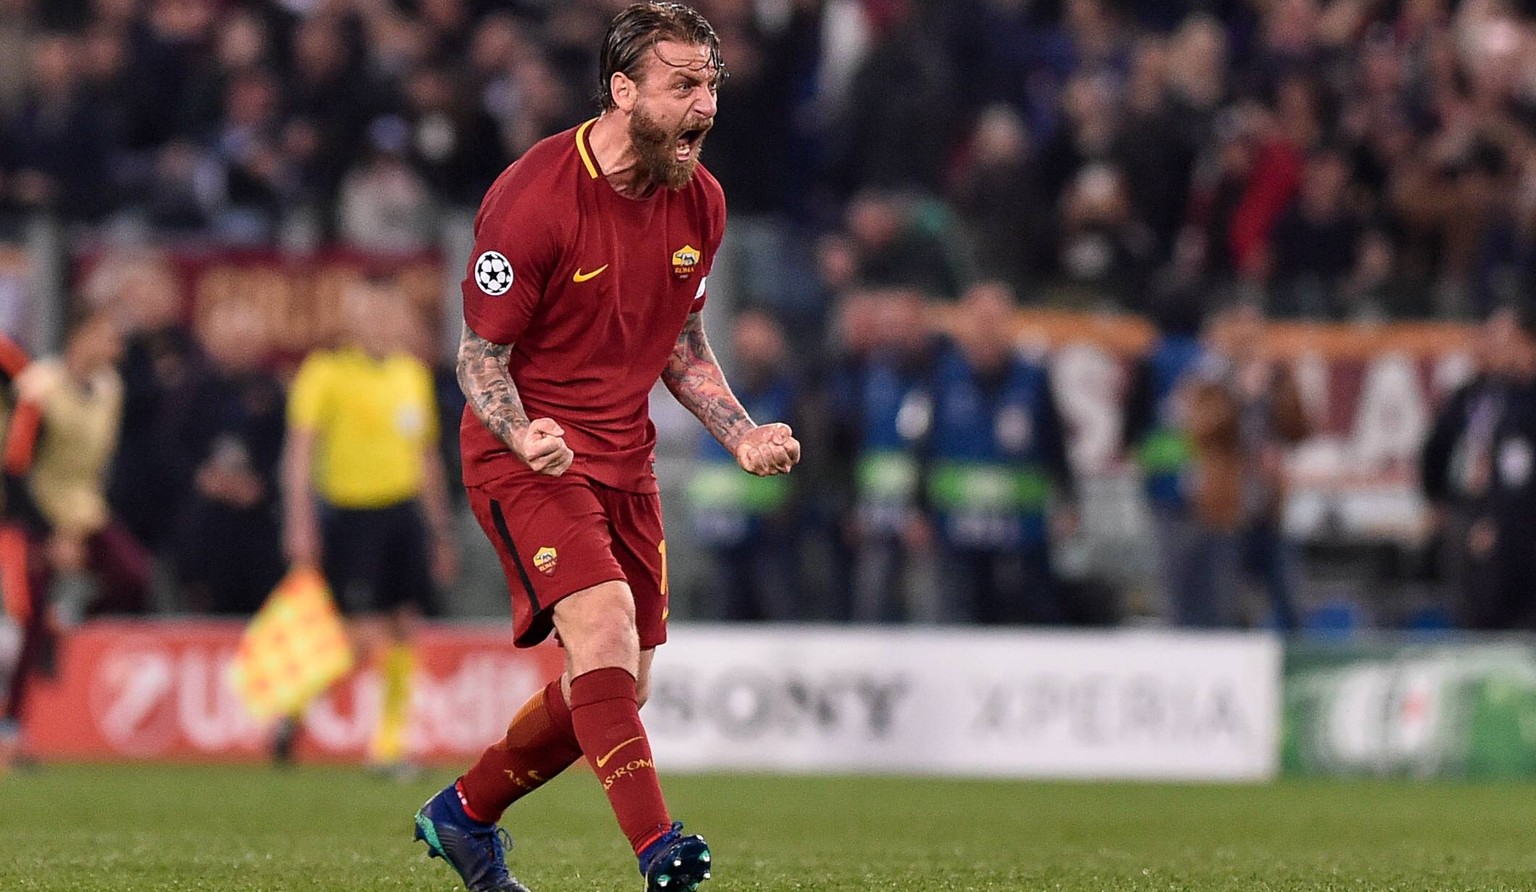 April 10, 2018 - Rome, Italy - Daniele De Rossi of Roma celebrates scoring second goal with a penalty kick during the UEFA Champions League Quarter Final match between Roma and FC Barcelona Barca at S ...